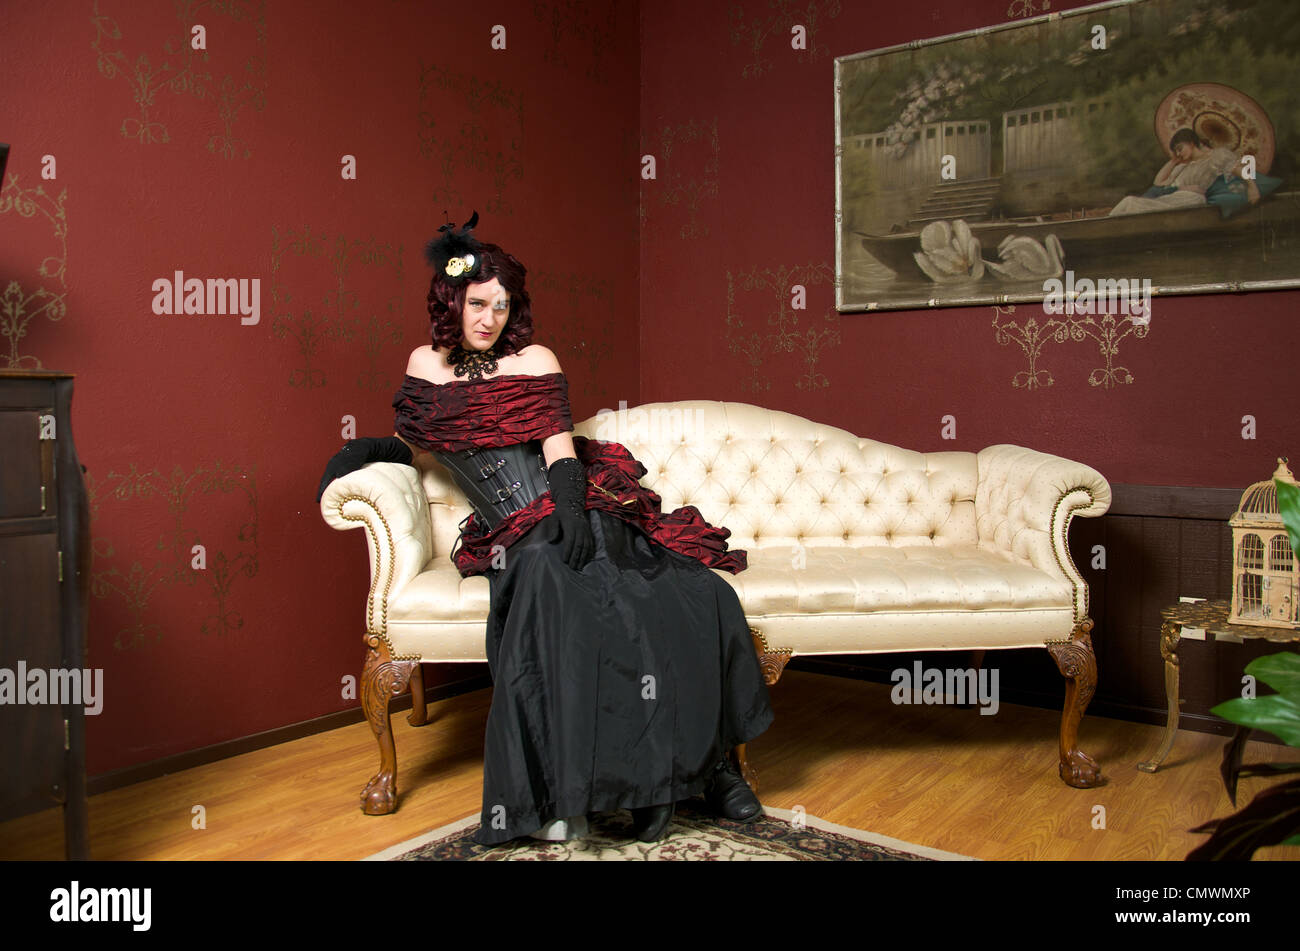 A Lady Dressed In Victorian Steampunk Outfit On White Couch